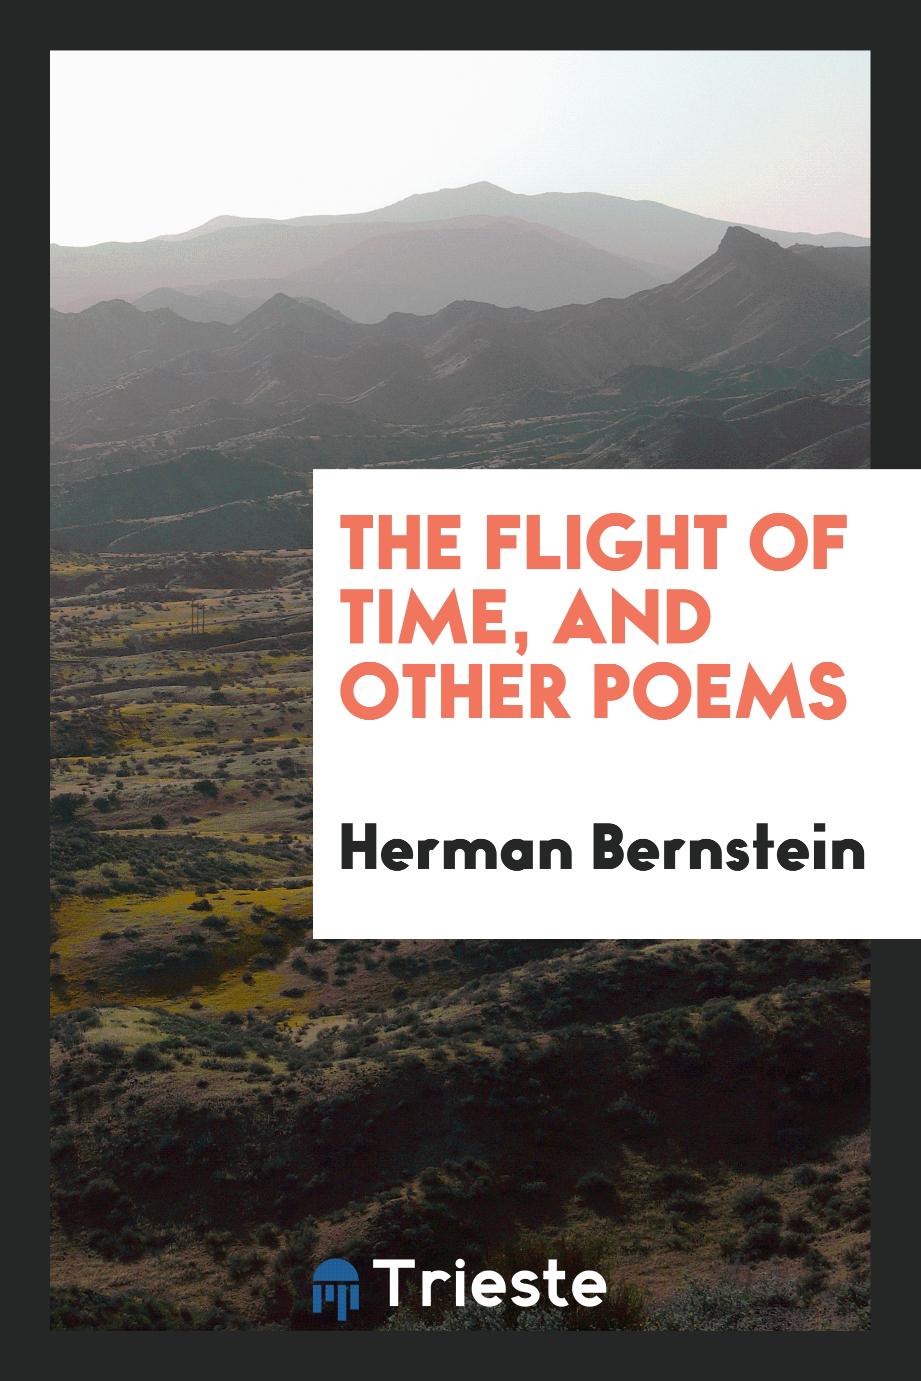 The Flight of Time, And Other Poems